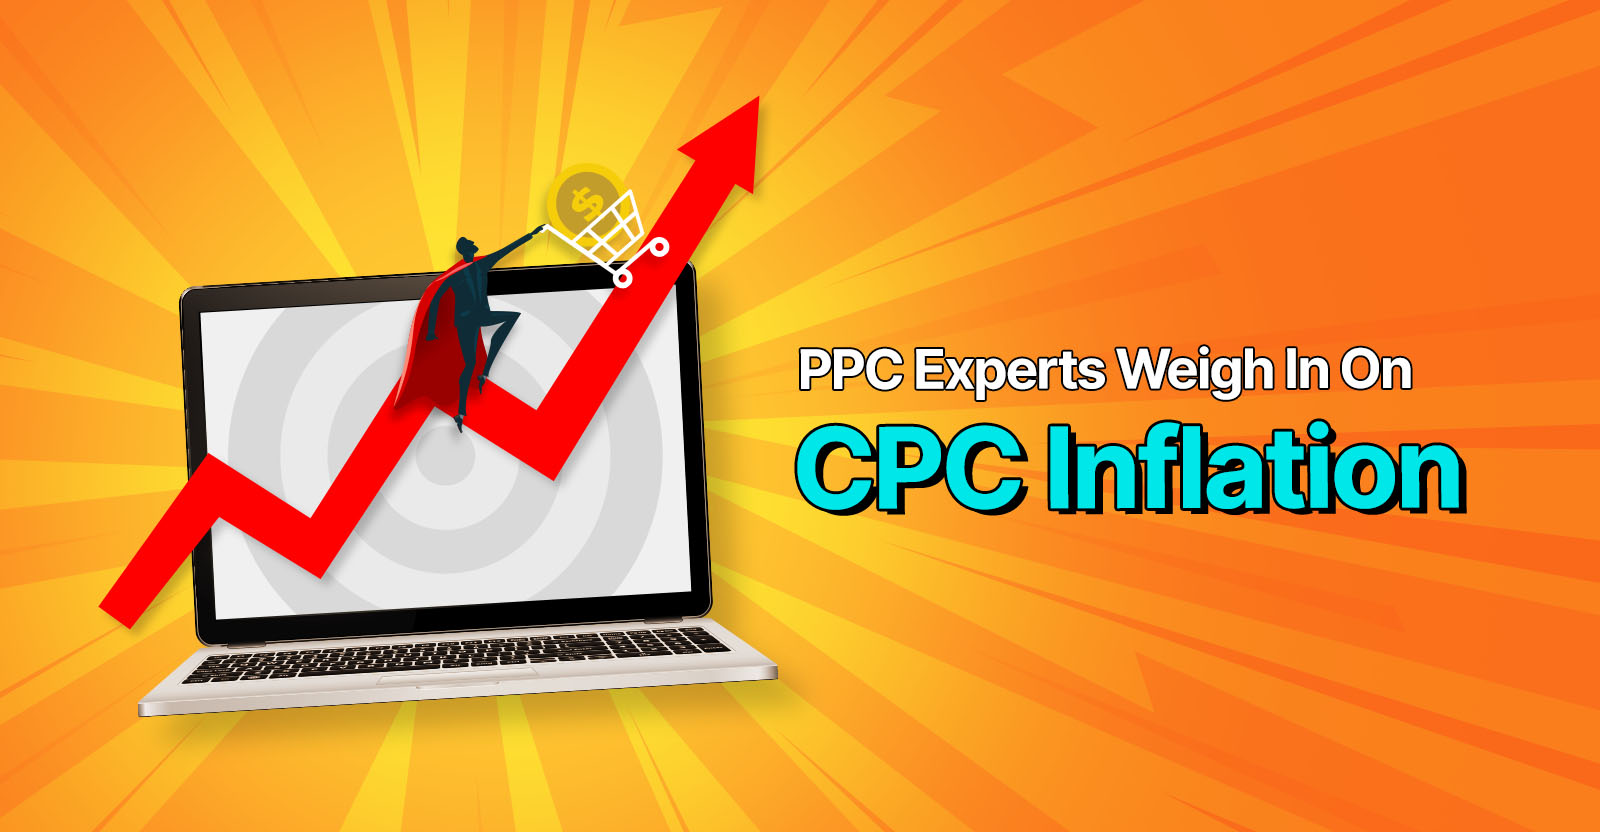 PPC Experts Weigh In On CPC Inflation